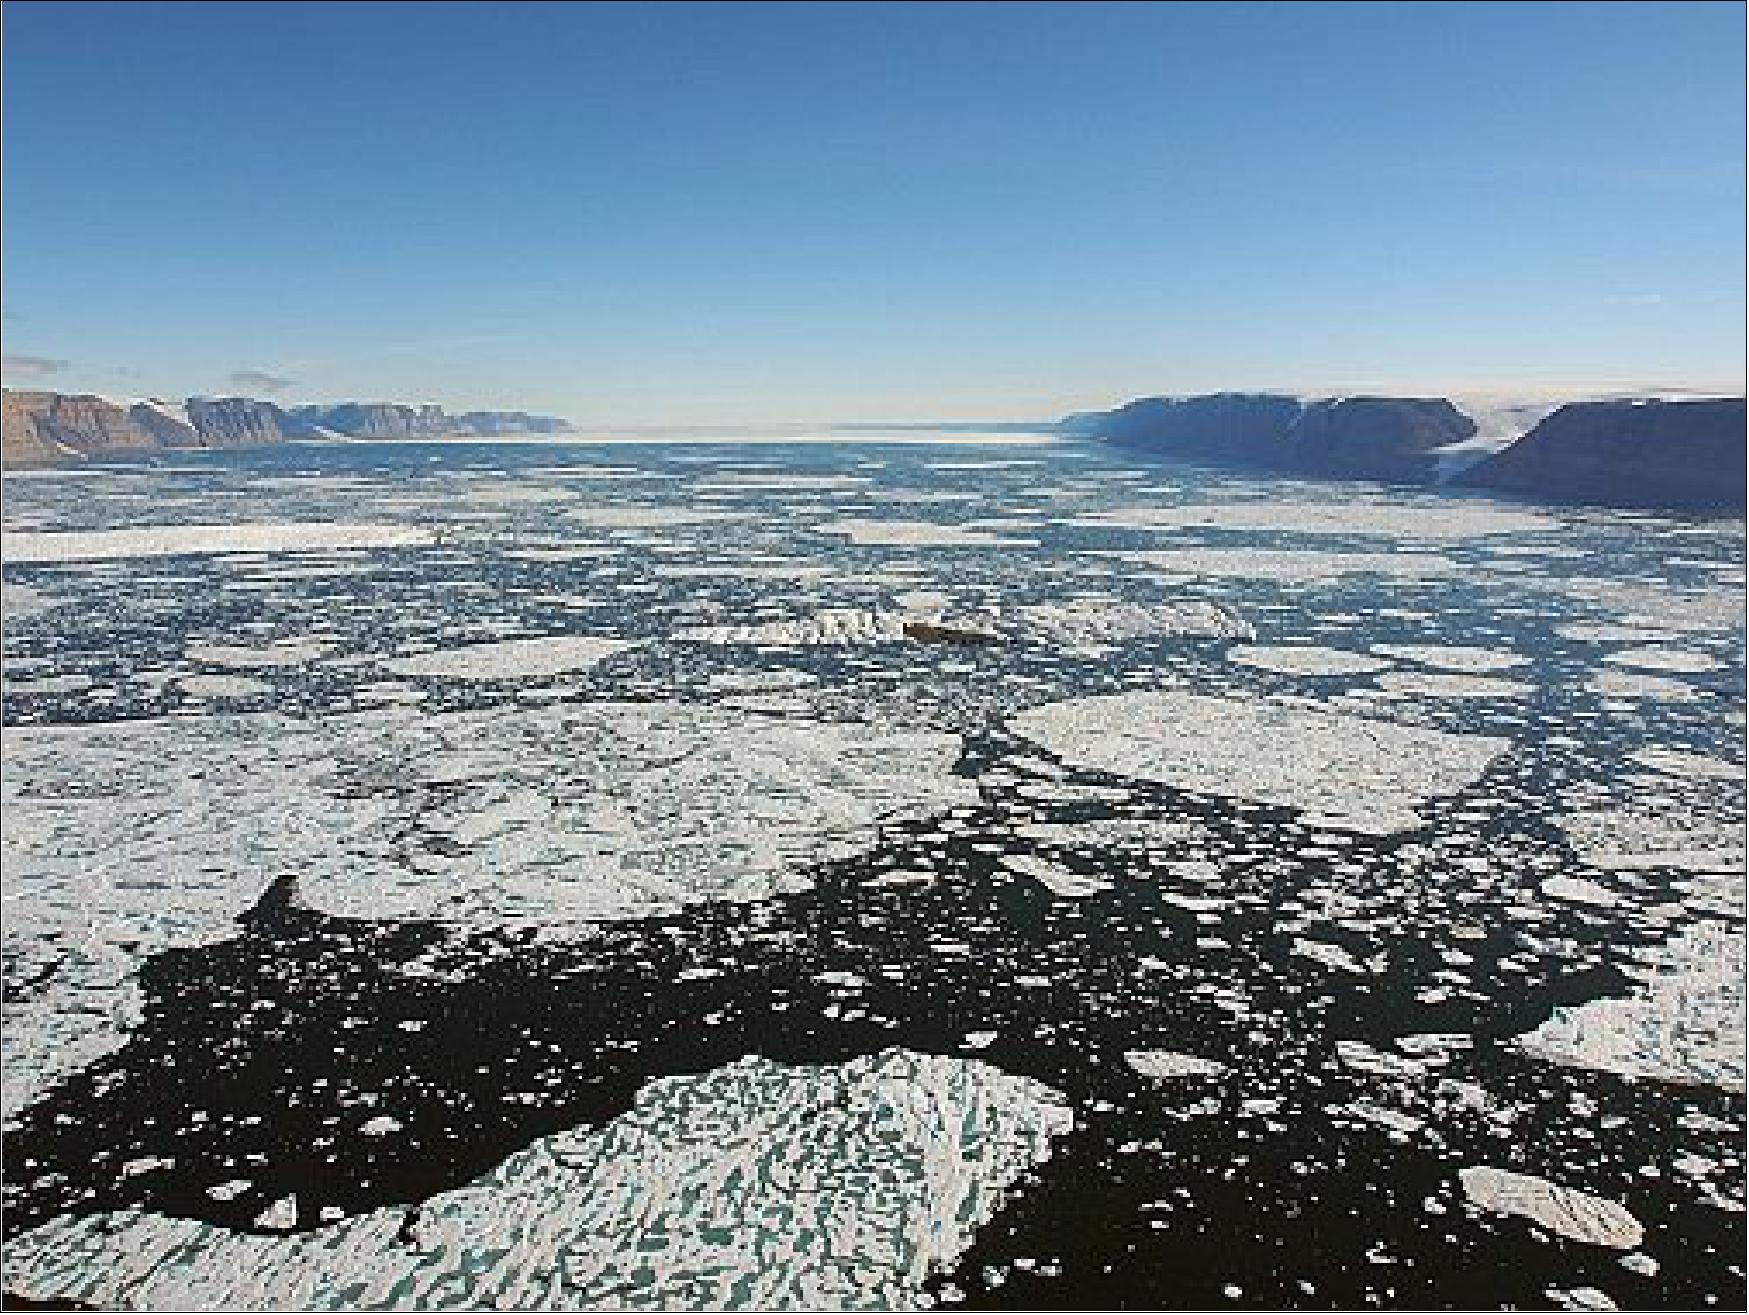 Figure 34: The 20 km-wide Petermann Fjord with the ice shelf in the far distance (Photo: Martin Jakobsson)